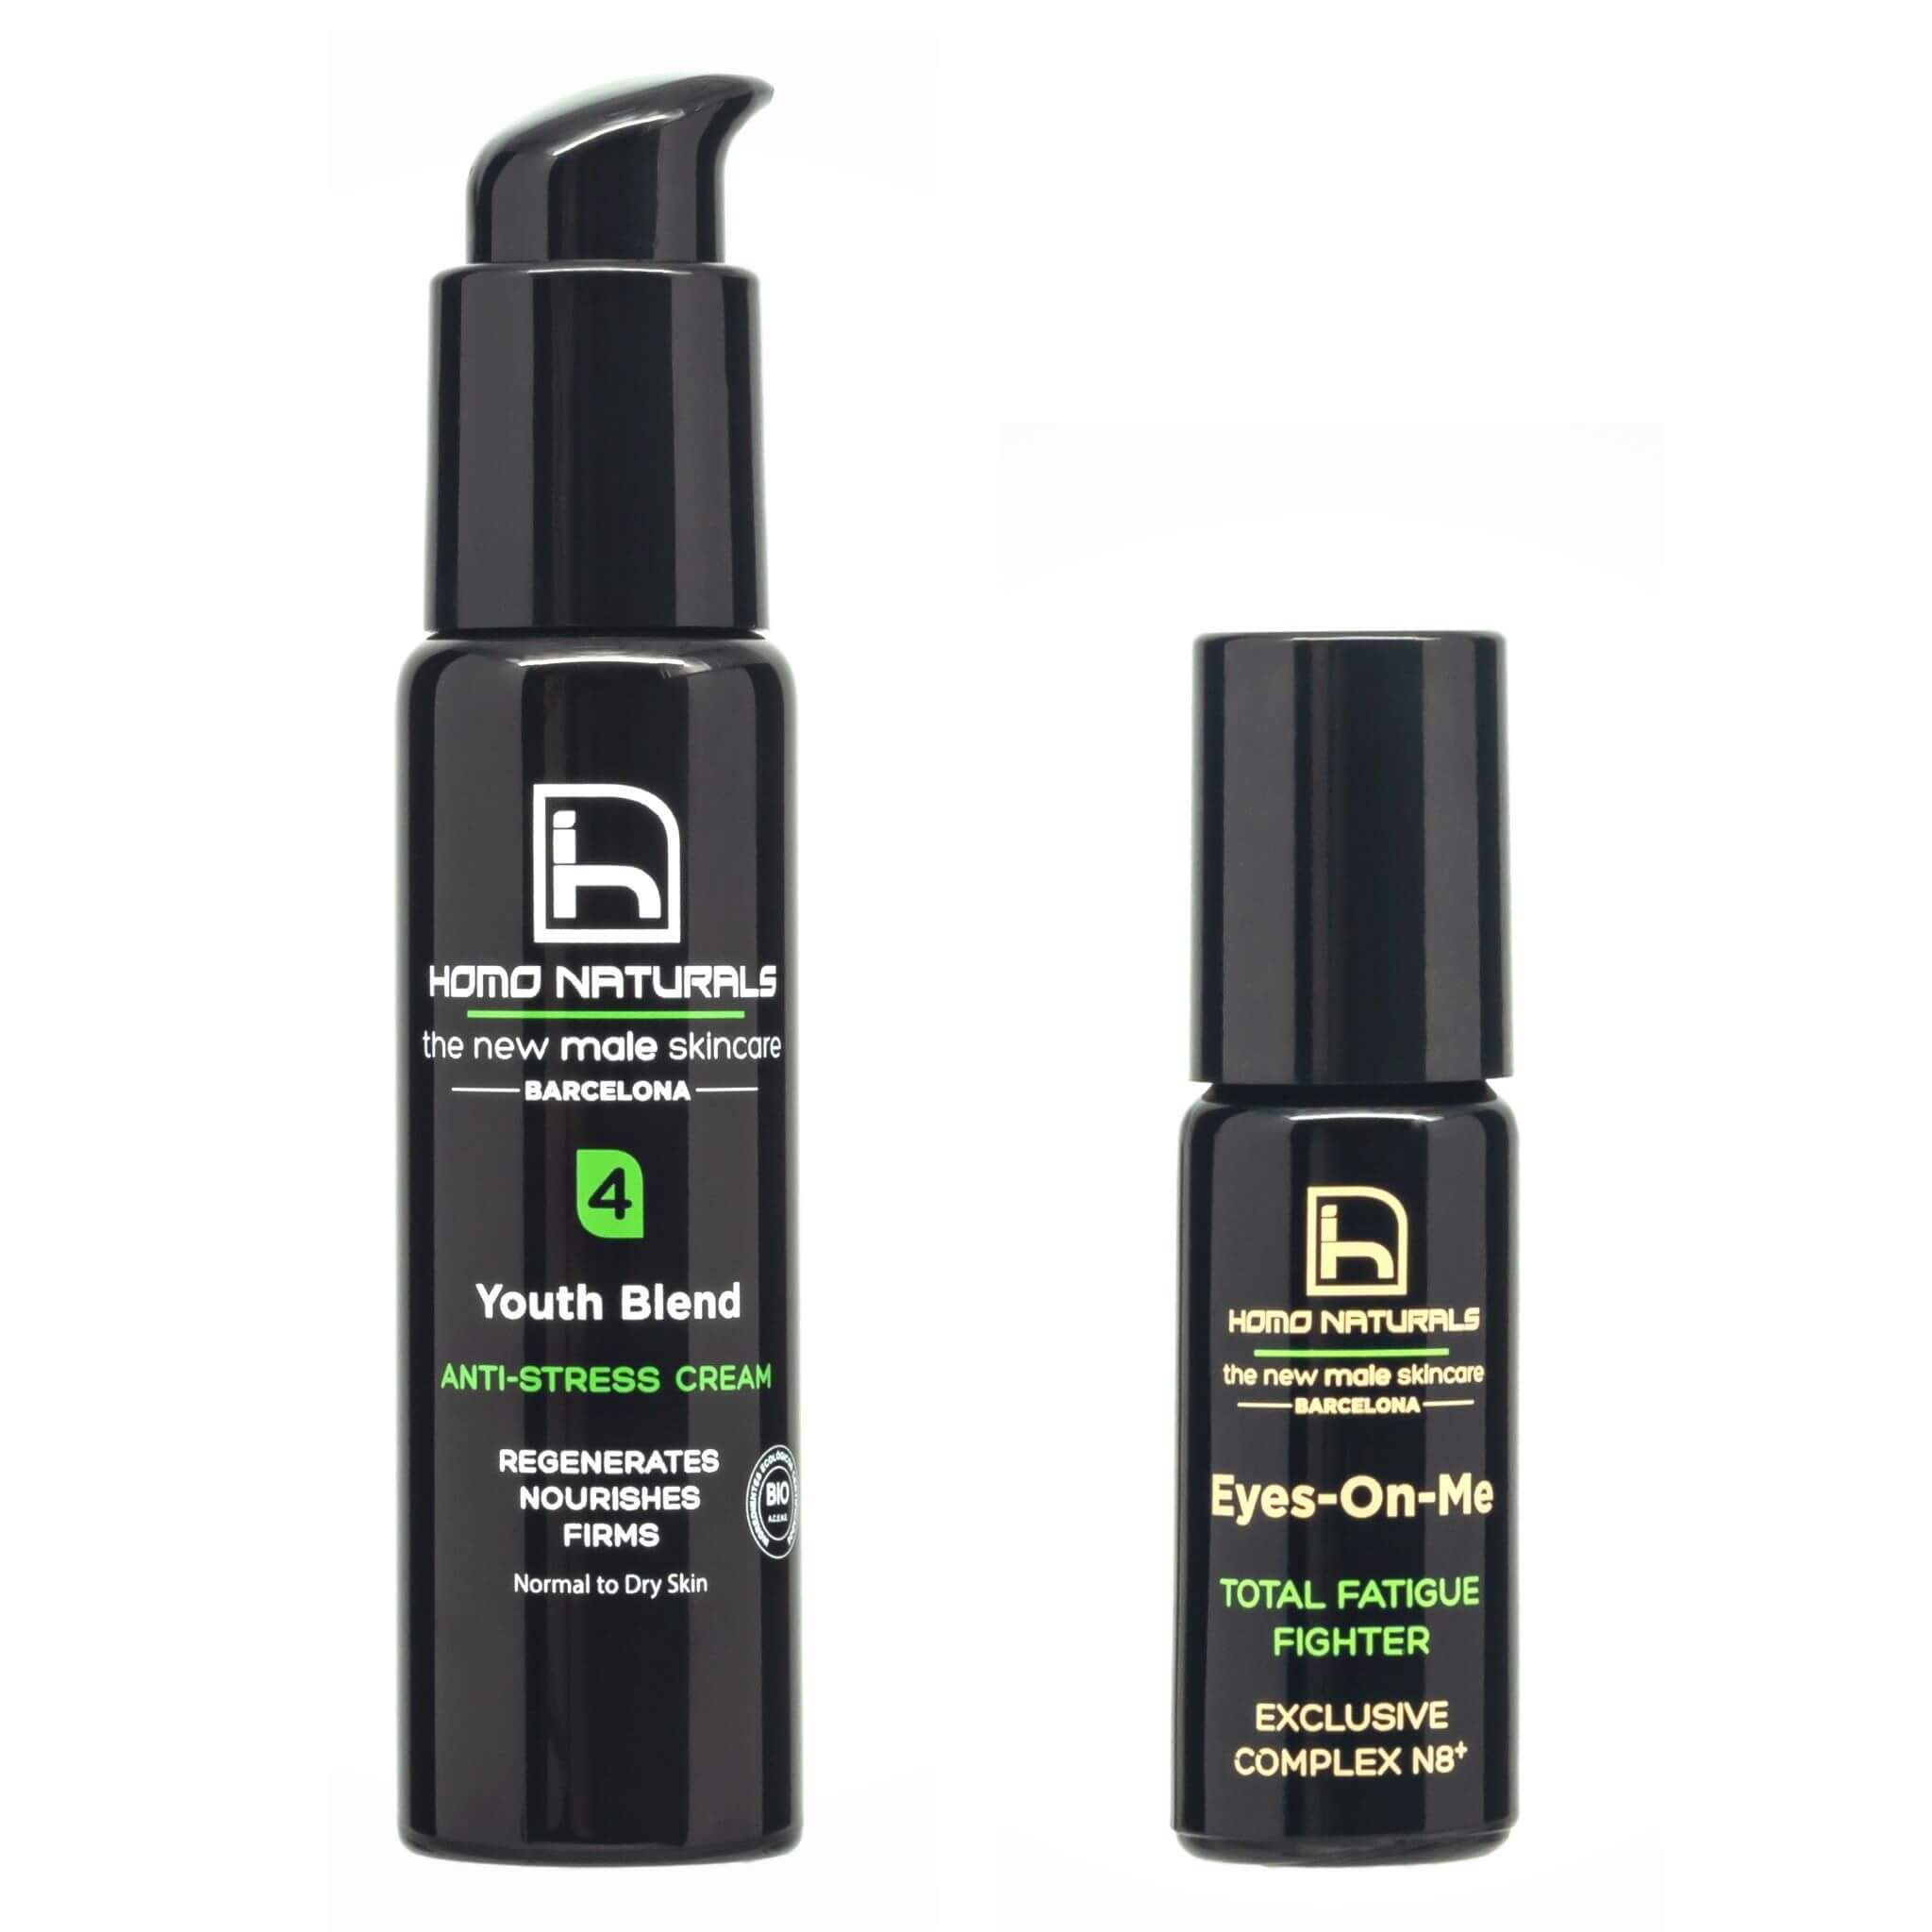 Anti-wrinkle cream for men and eye contour to remove dark circles